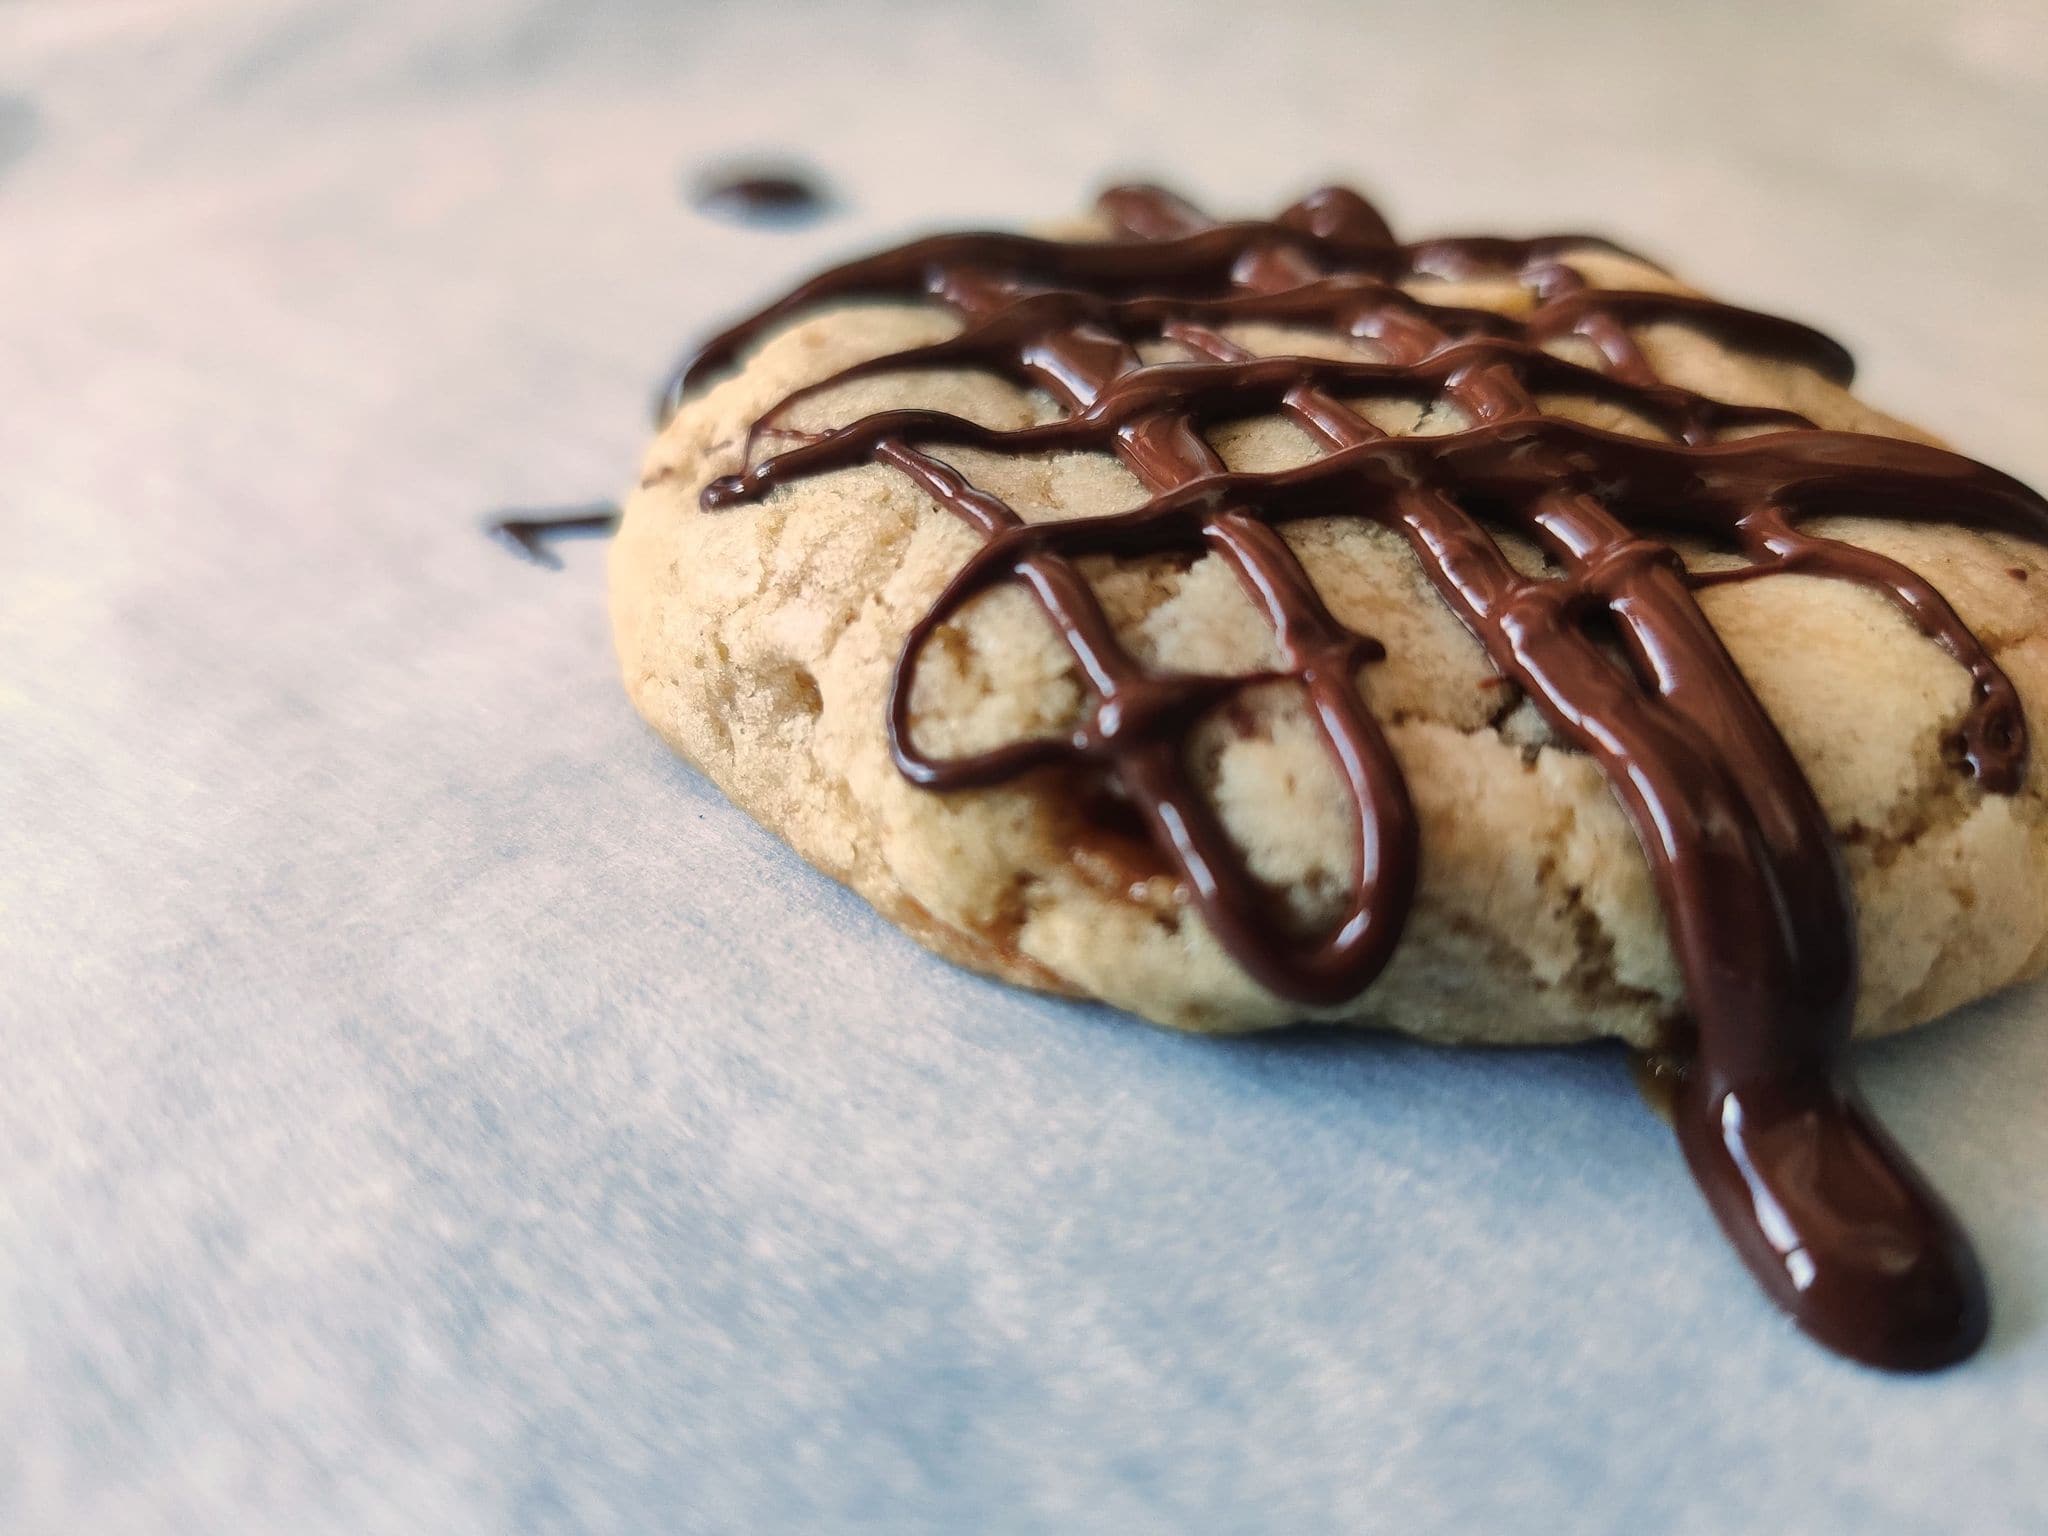 Bacon Skor Cookies with Chocolate Drizzle